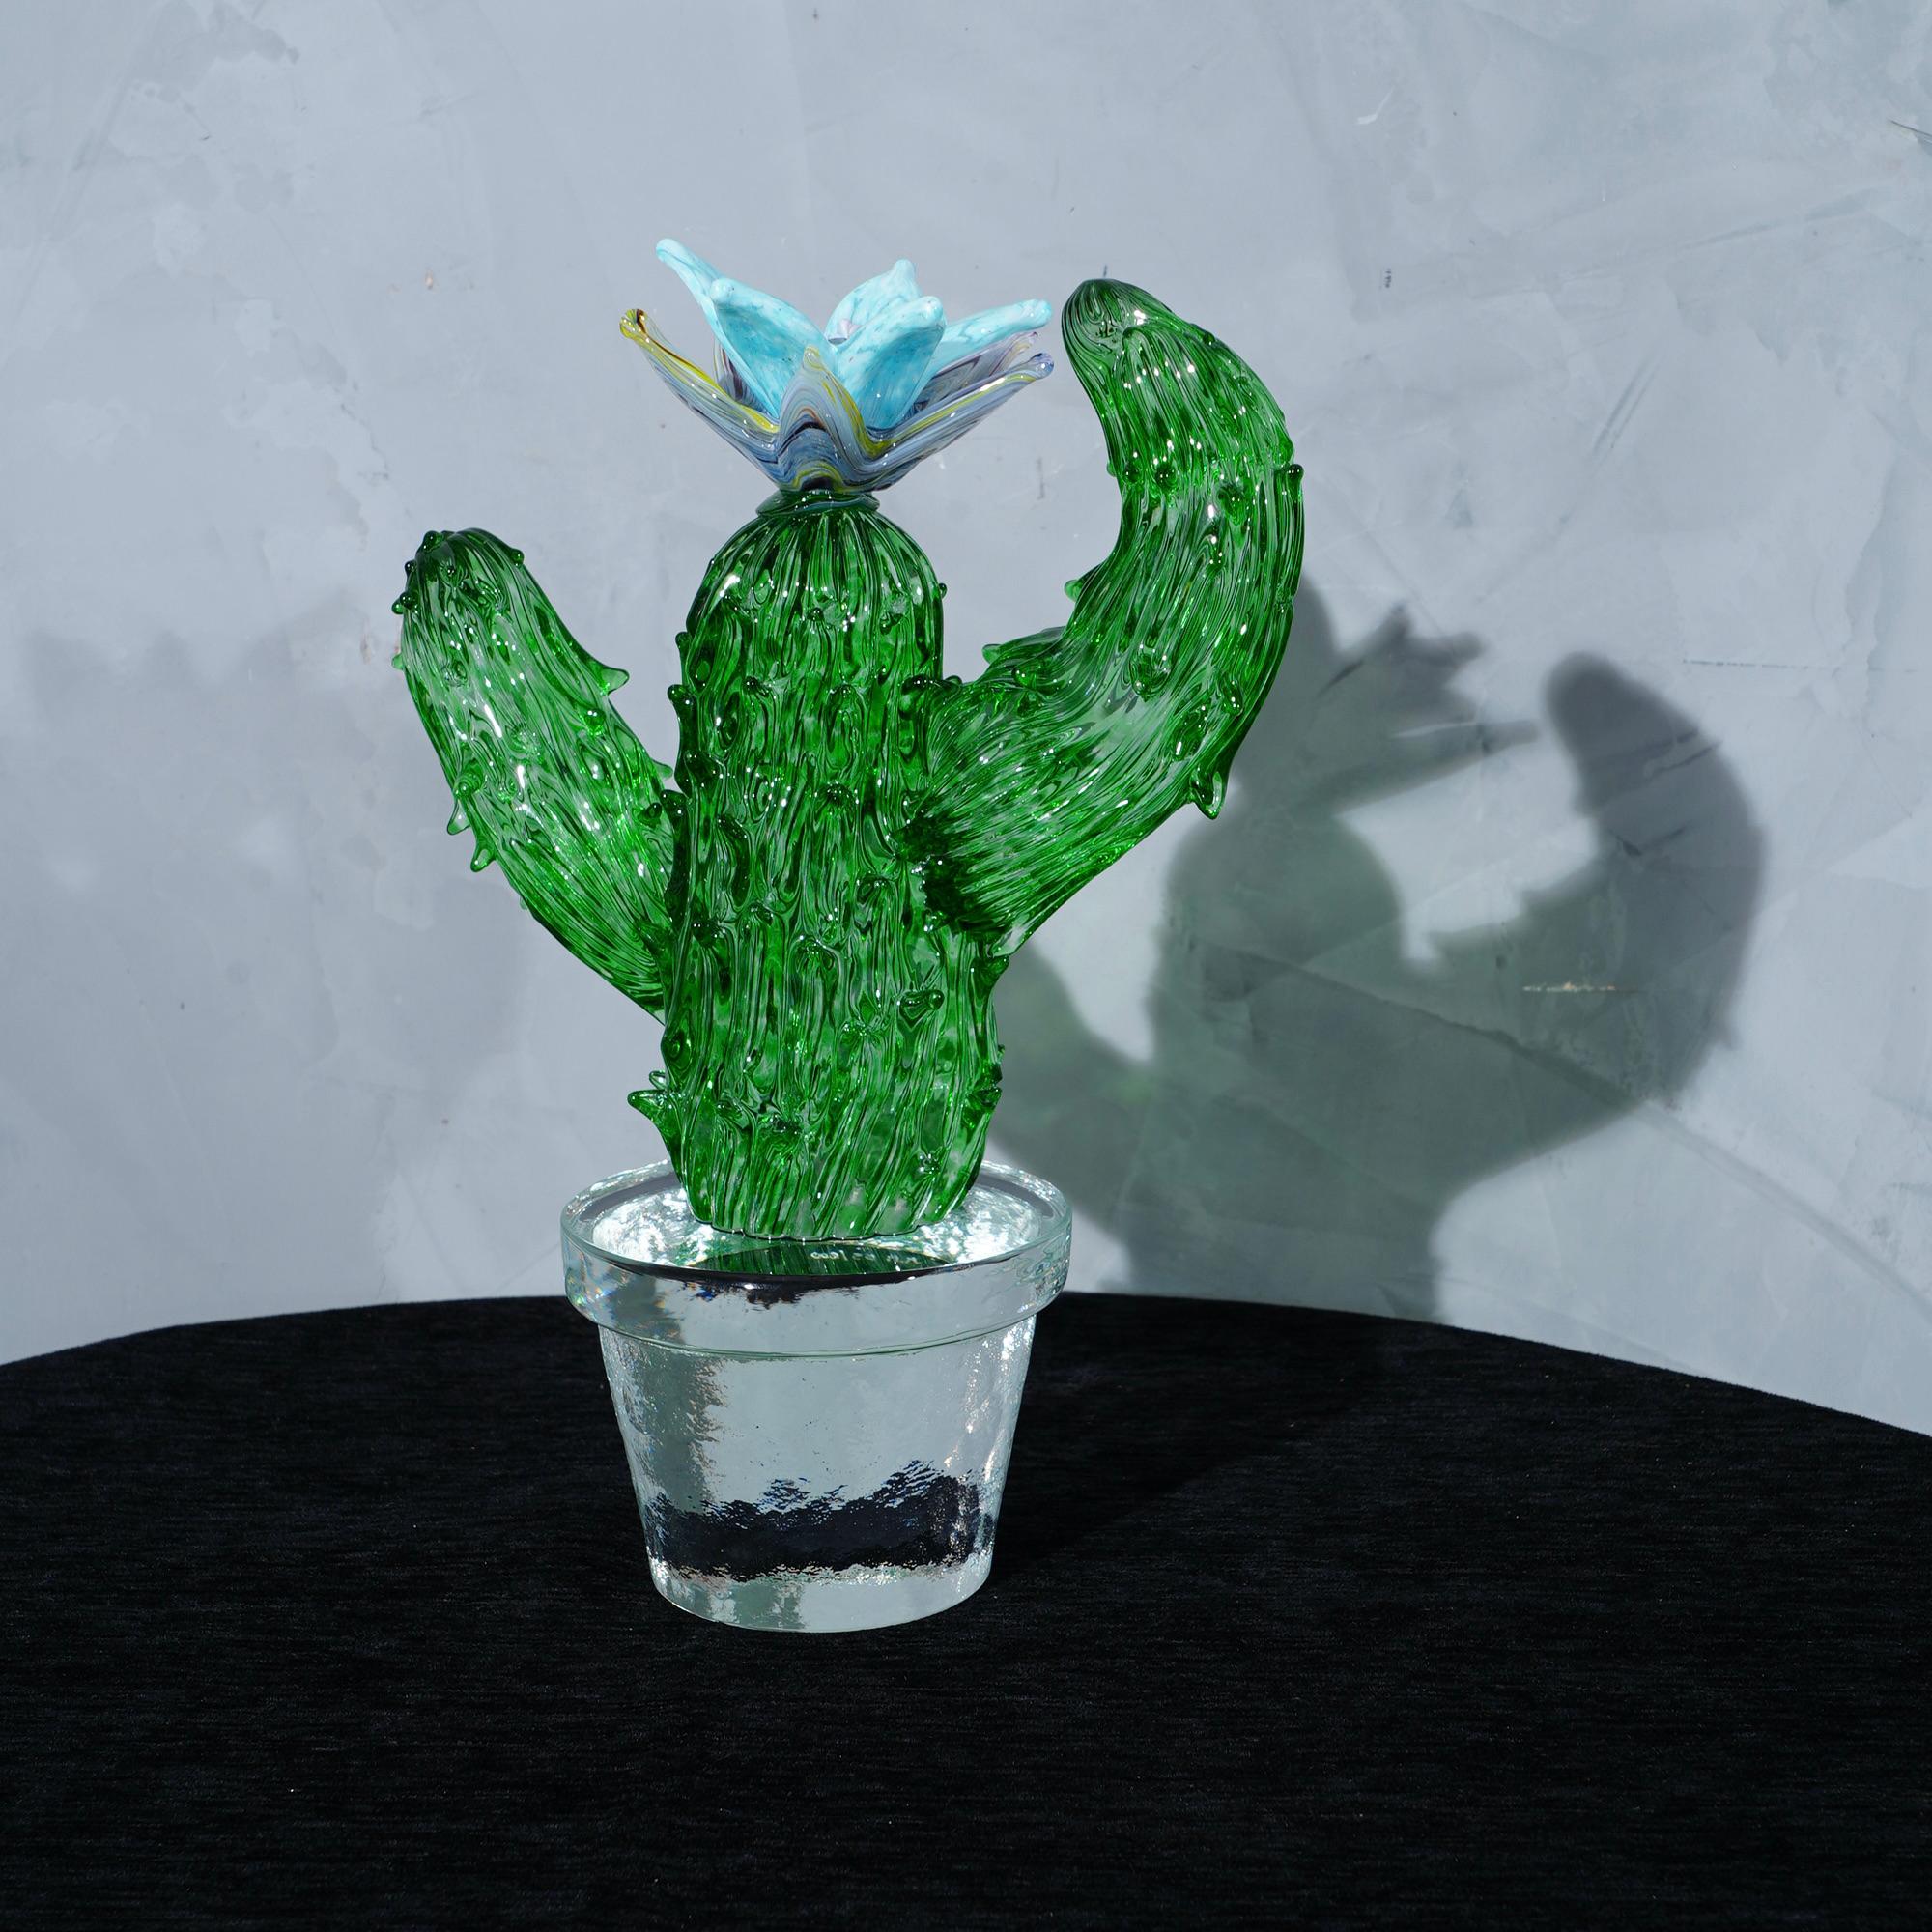 Italian design by Marta Marzotto creator of style, this cactus is a fashion icon of the Italian style, emerald green with a blue and azure colored spot, the flower.

In limited edition, as can be seen from the writing under the transparent vase